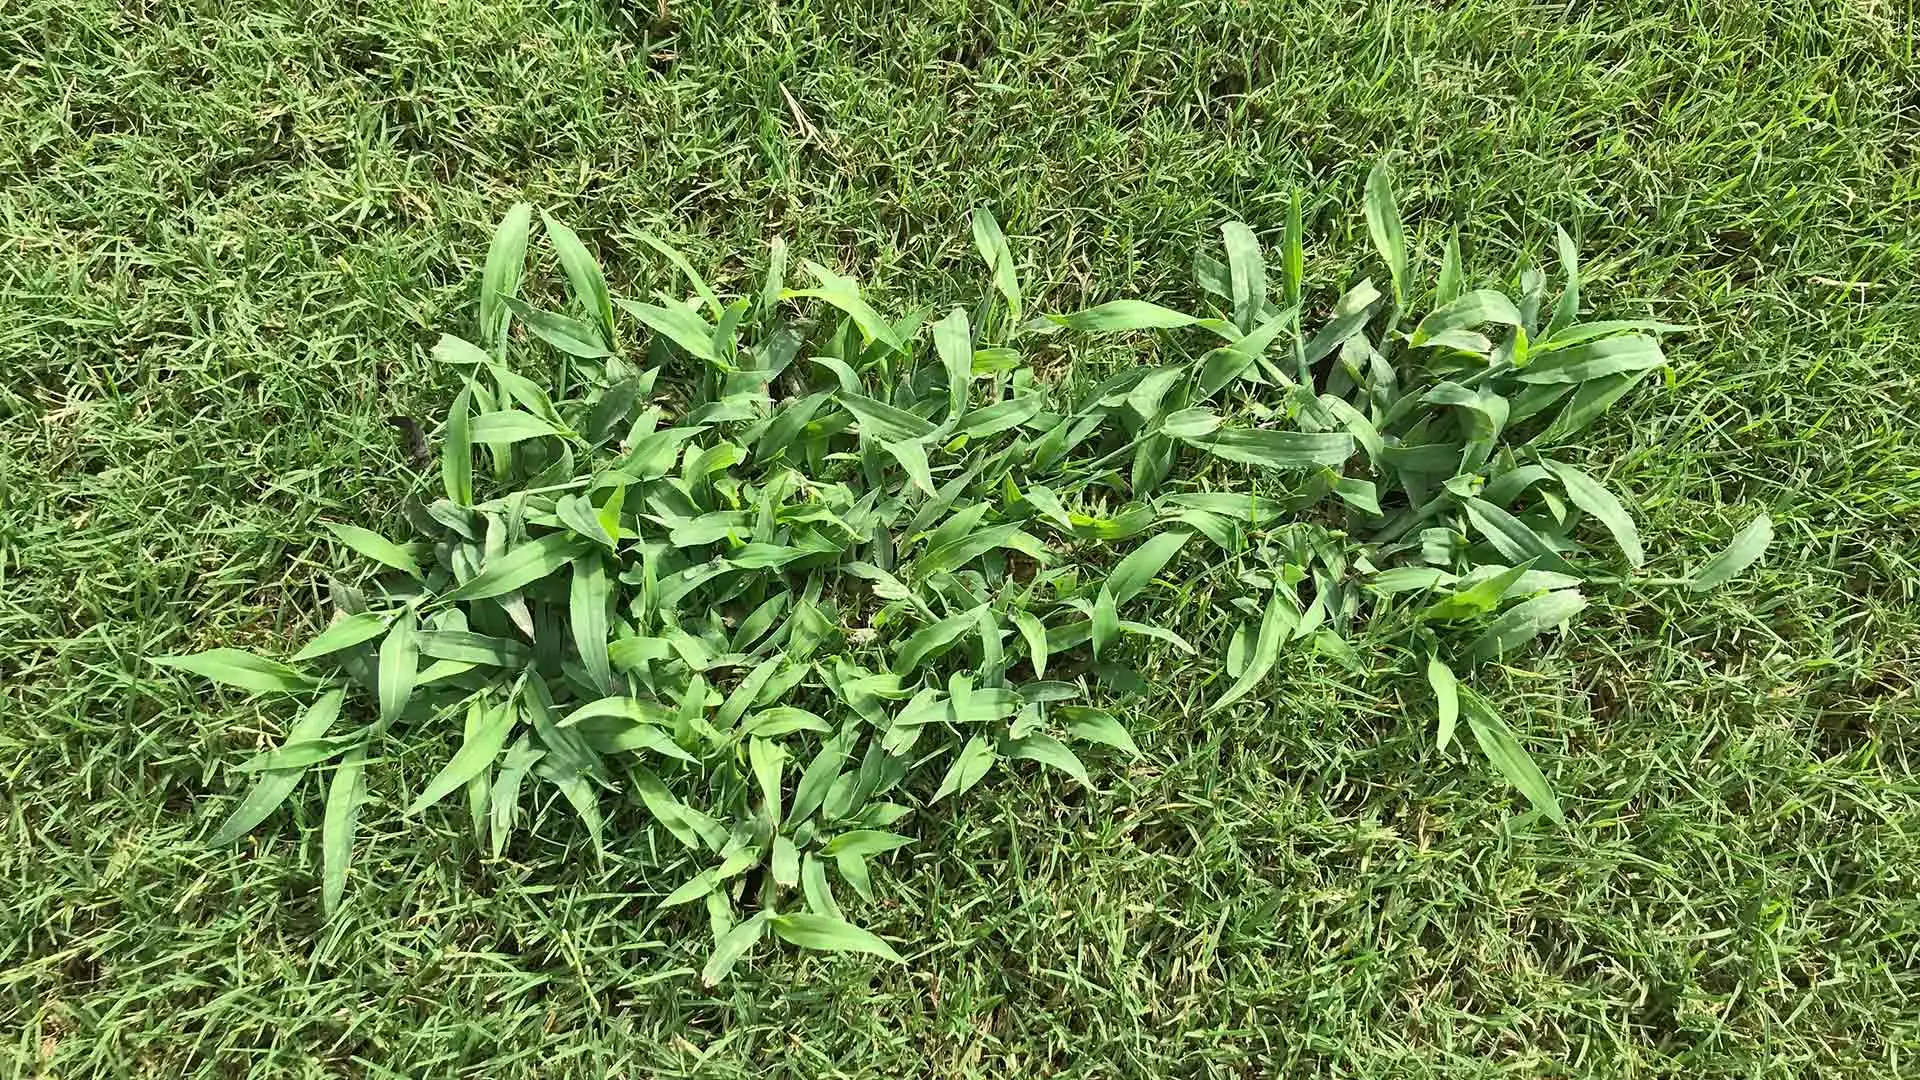 Weed Control Service Near Me